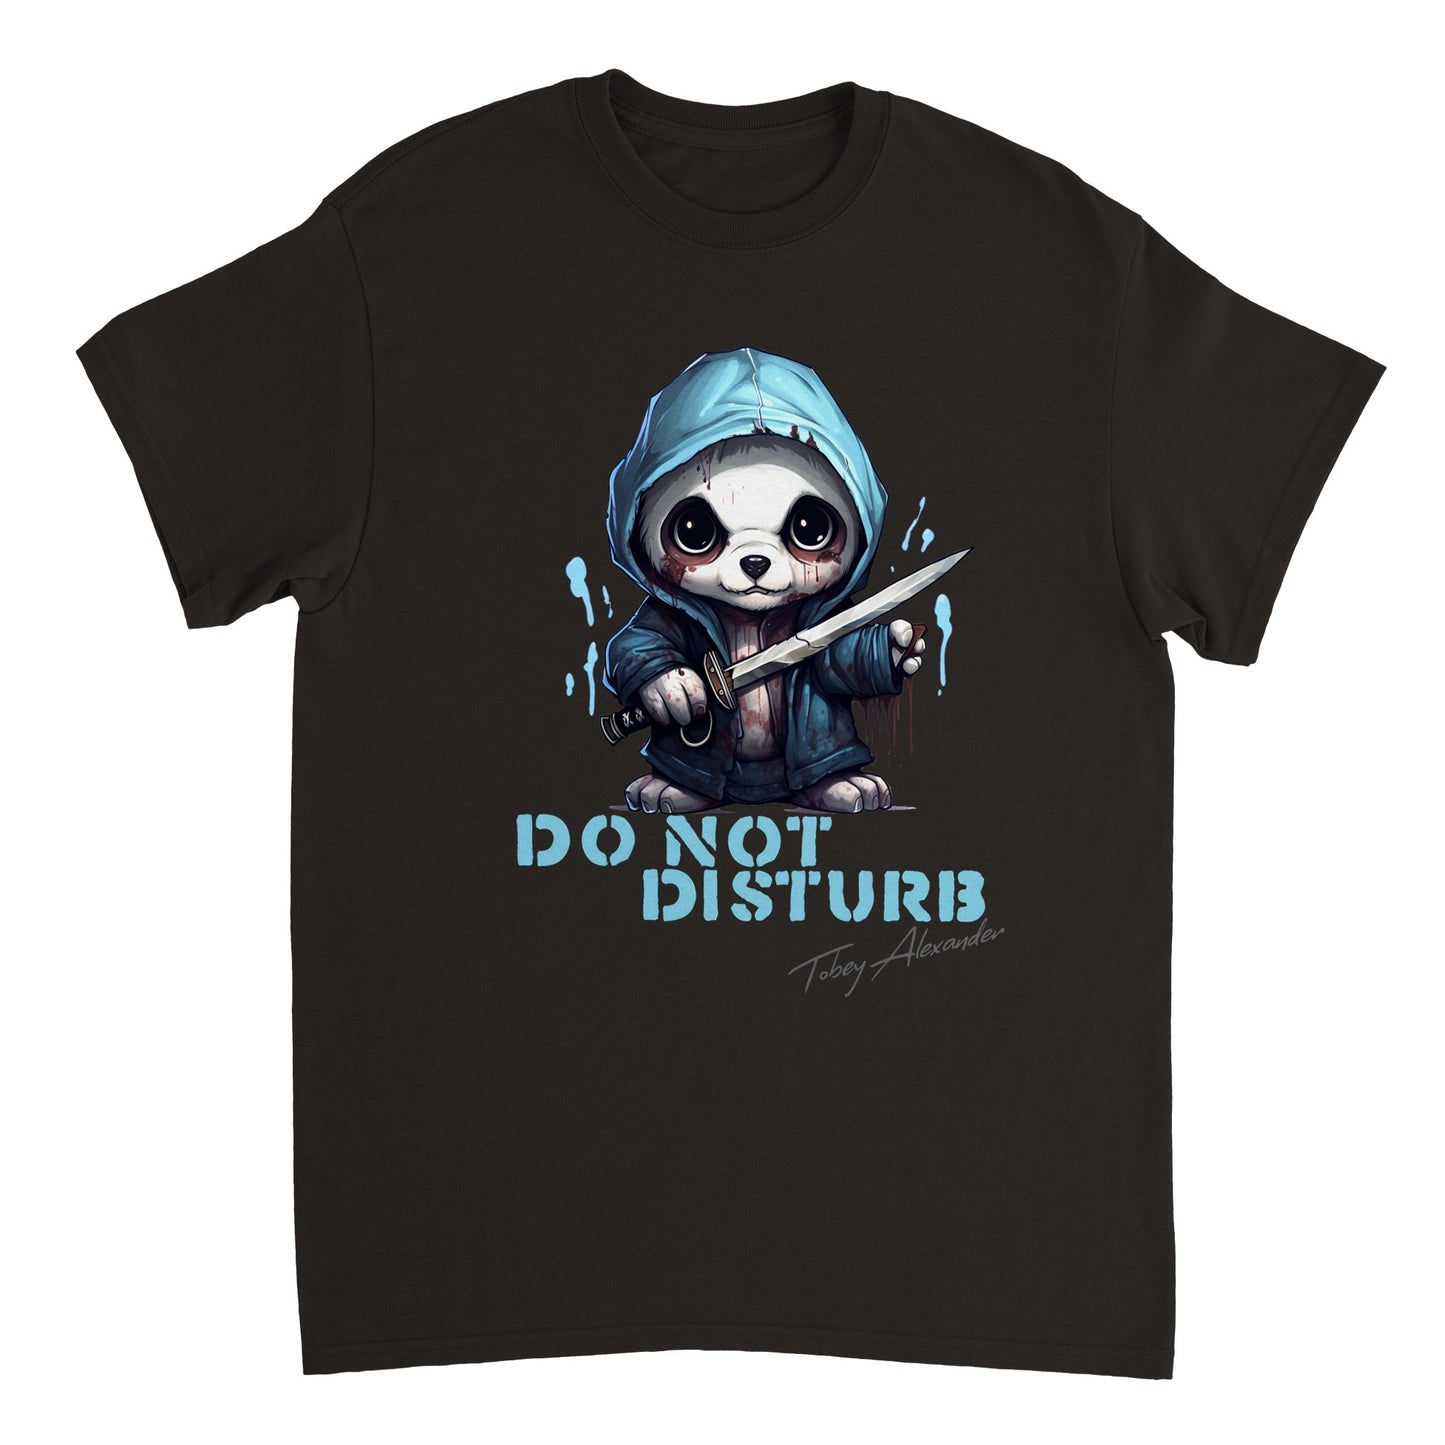 DND Diversity-Expressive Panda: Unisex Crewneck Tee for Unique Self-Expression Clothes By Tobey Alexander